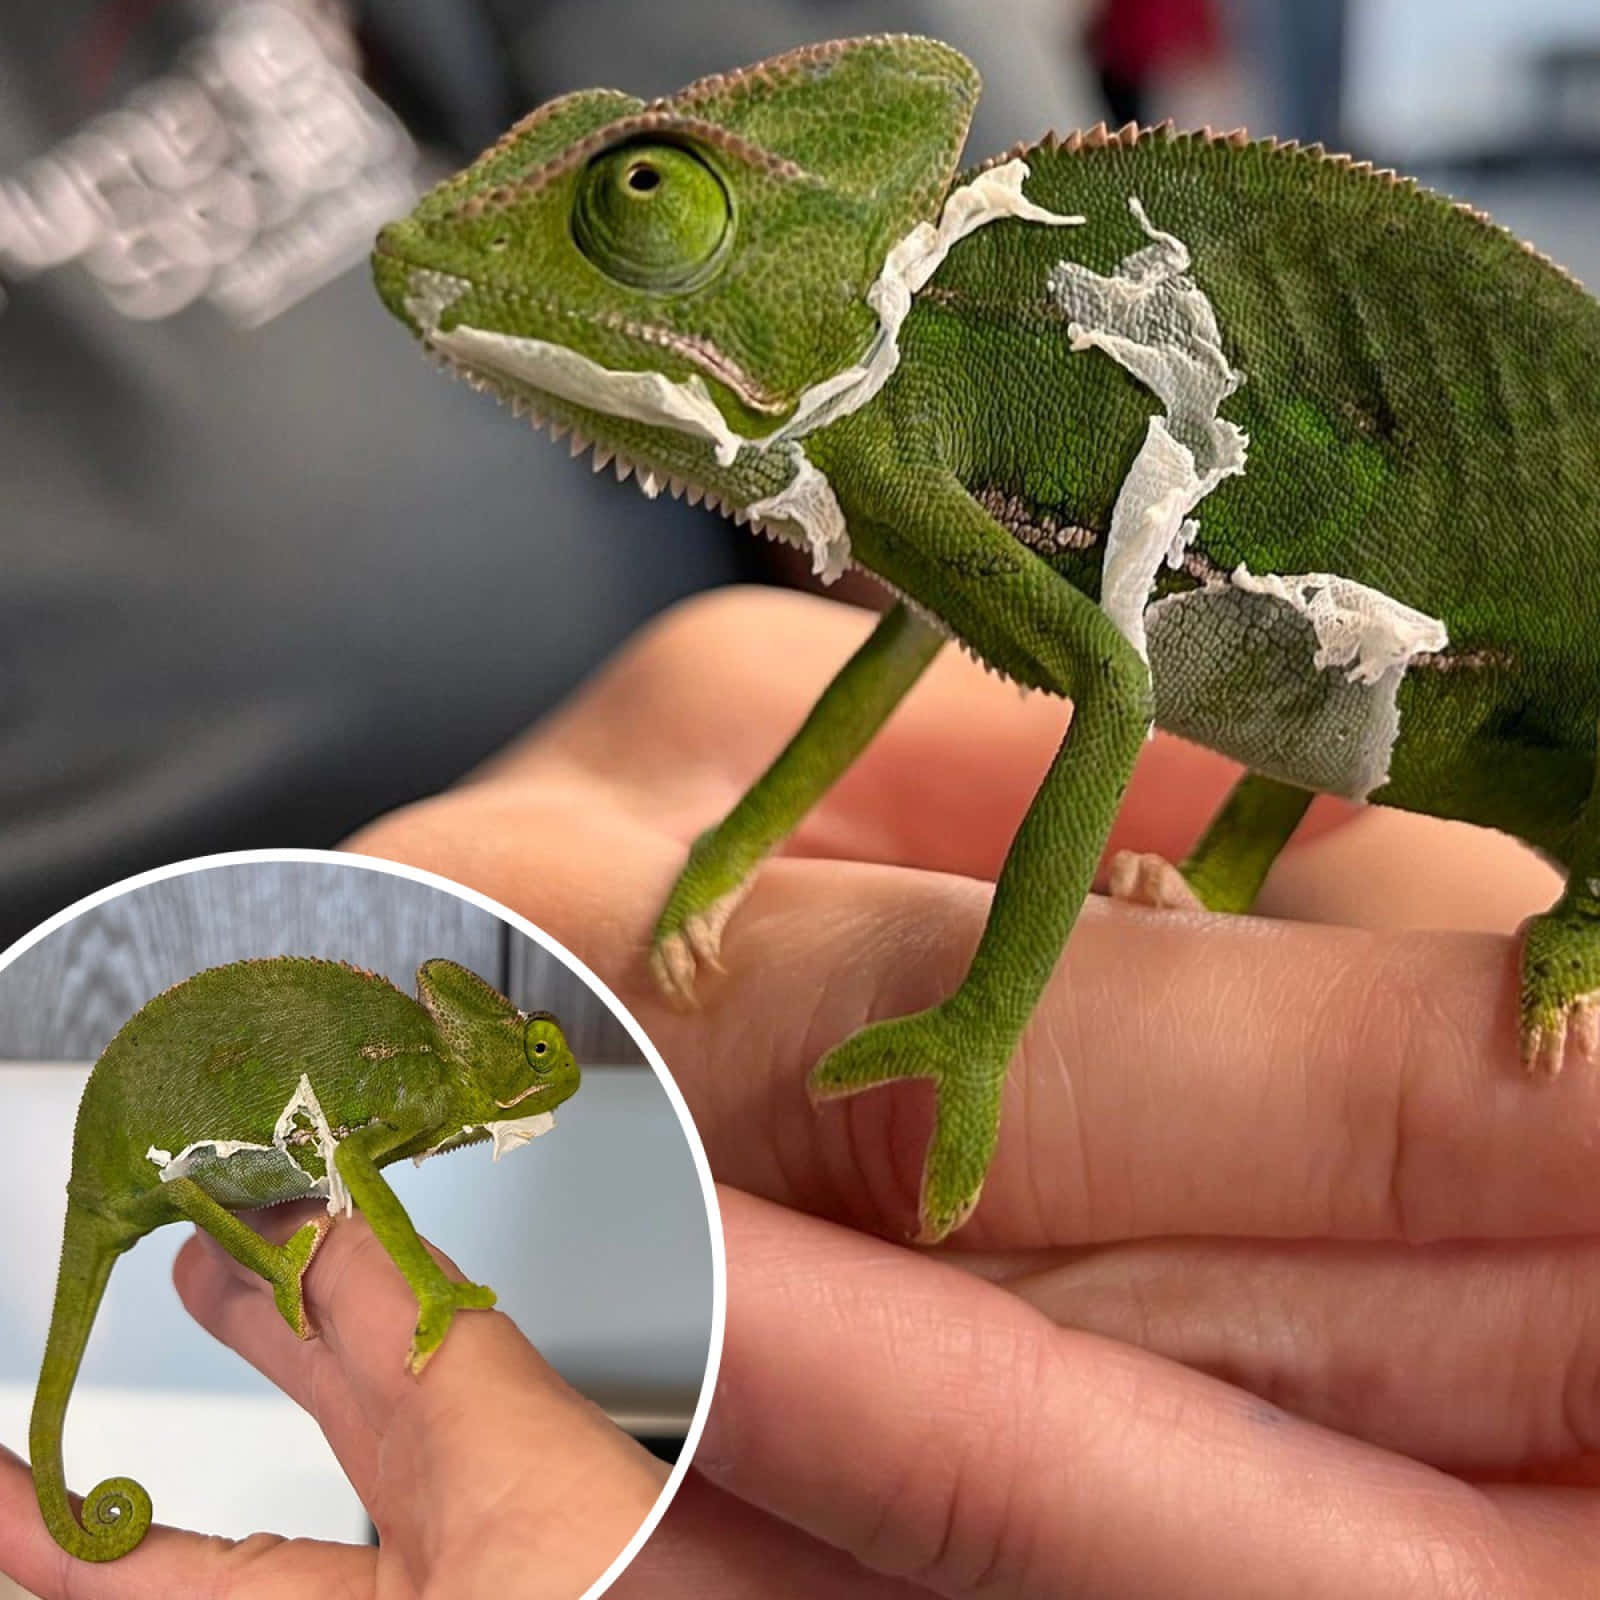 Two chameleons staring at each other